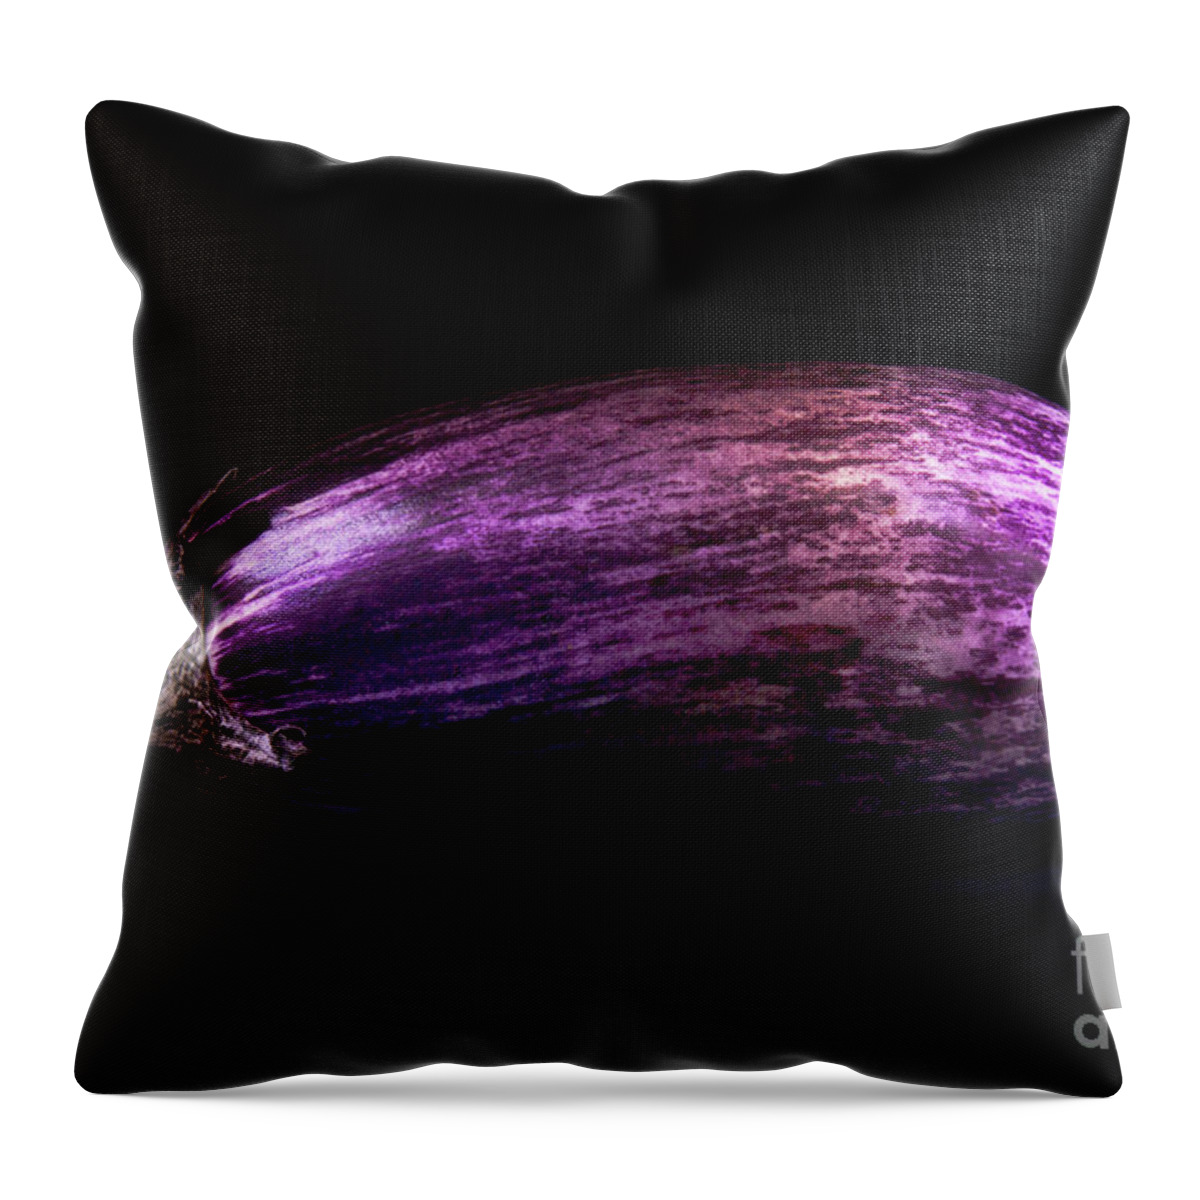 Eggplant Throw Pillow featuring the photograph Striped Eggplant by Elisabeth Lucas